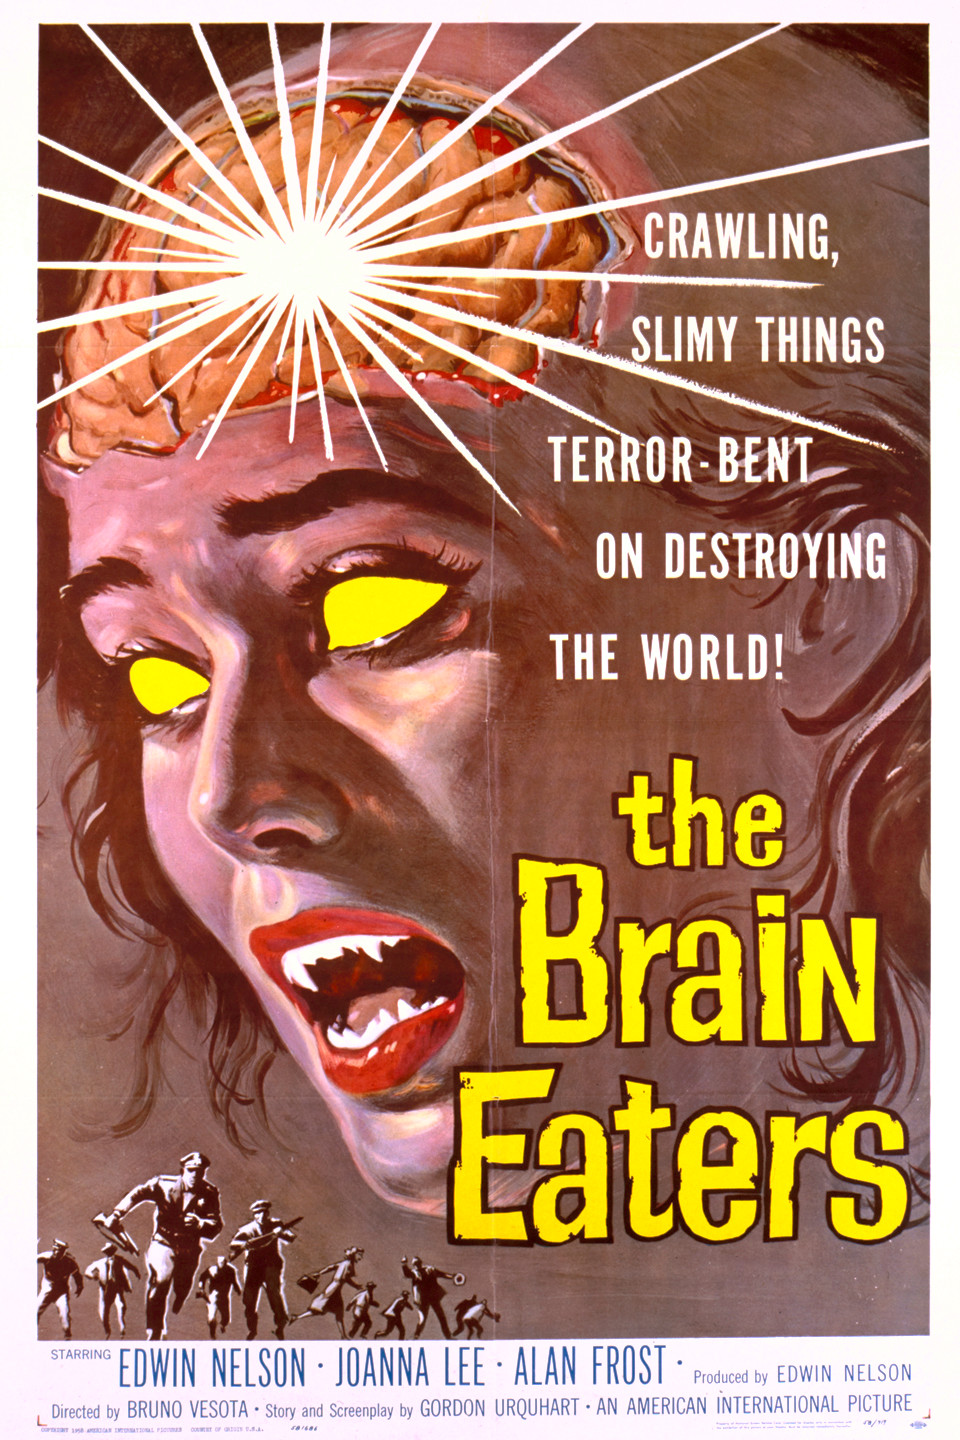 The Brain Eaters